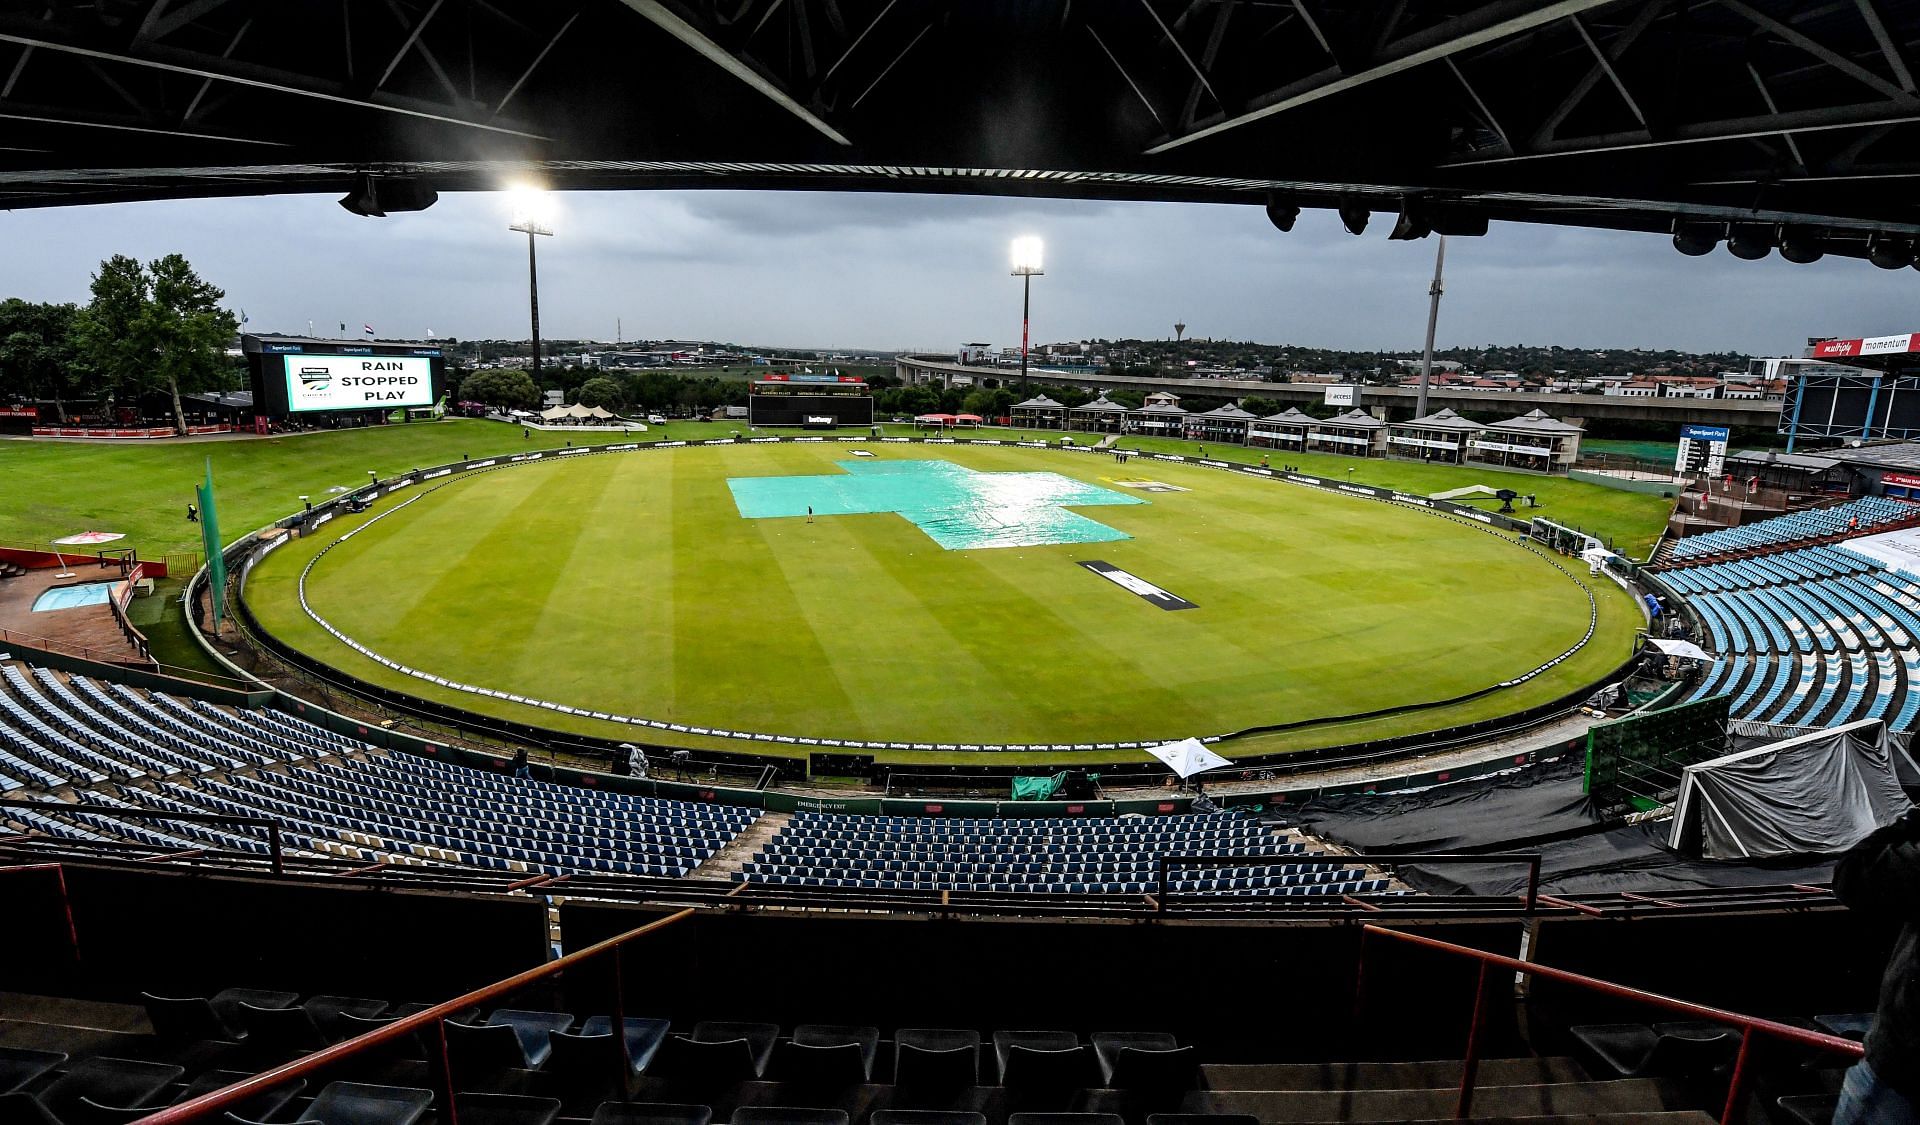 SuperSport Park in Centurion will host the first Test between India and South Africa